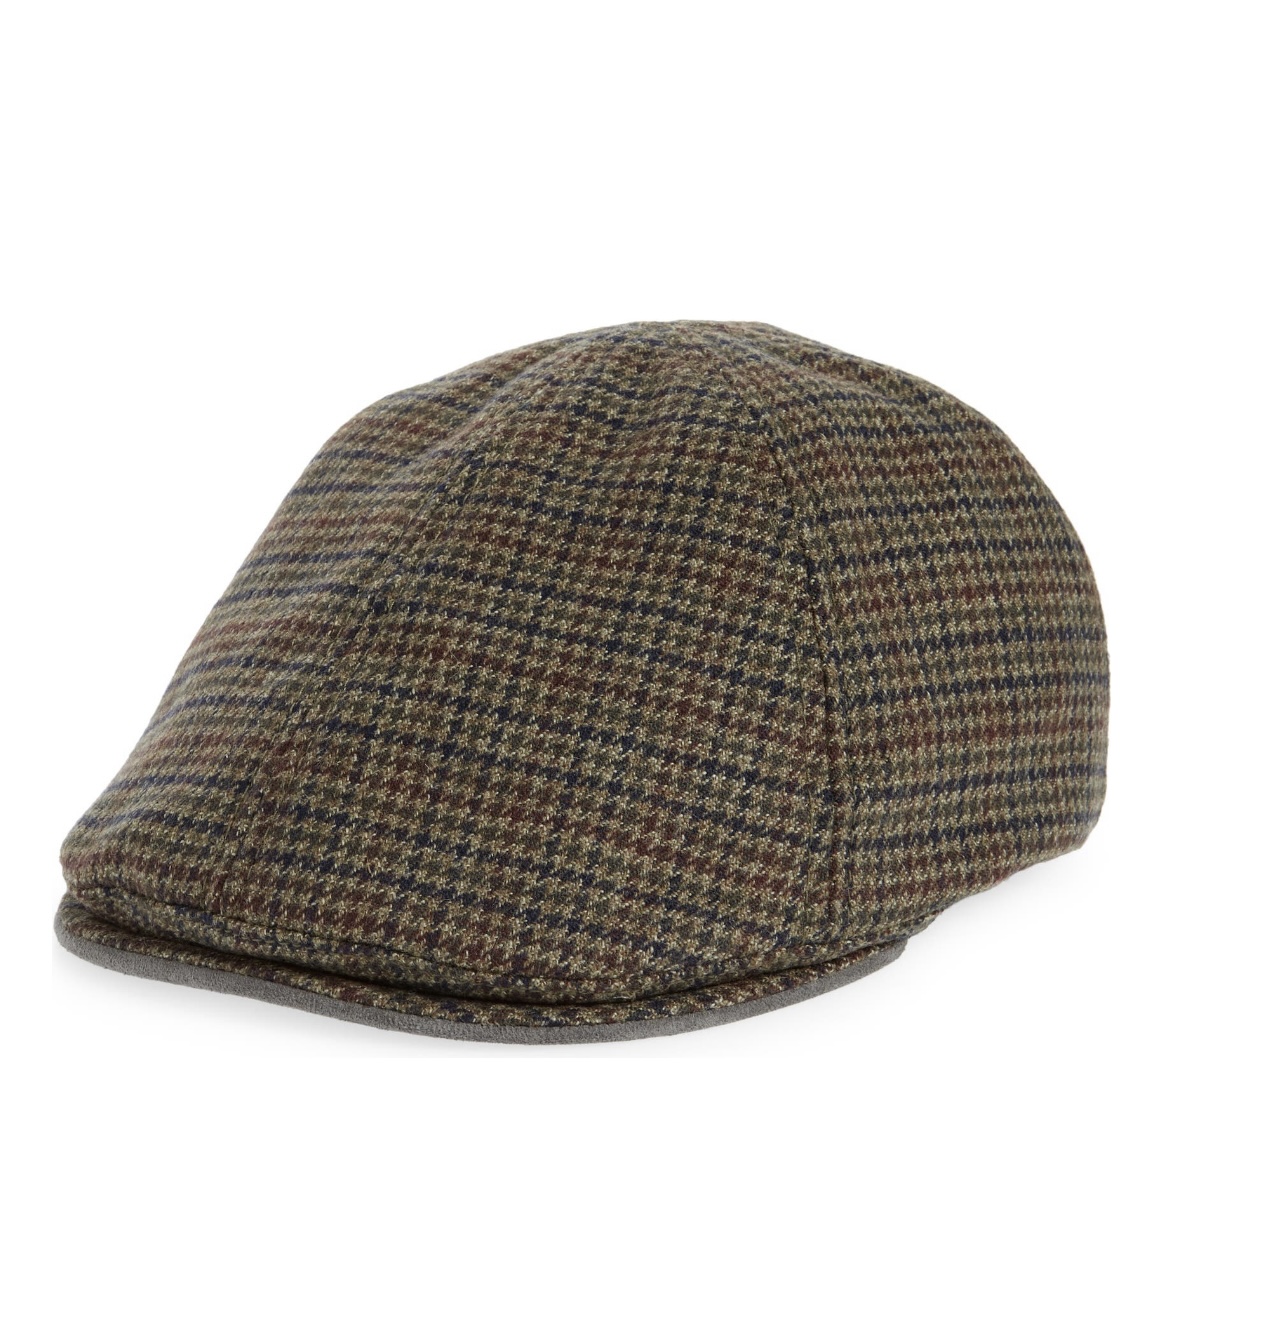 Dr-Tumbletys-apothecary-inspired-by-spirits-distilling-co-pittsburgh-allentown-hilltop-goorin-bros-brothers-hat-hats-flat-cap-flatcap-driving-newsboy-pacheco-wool-houndstooth-green-grey-olive[-brown-blue-pattern